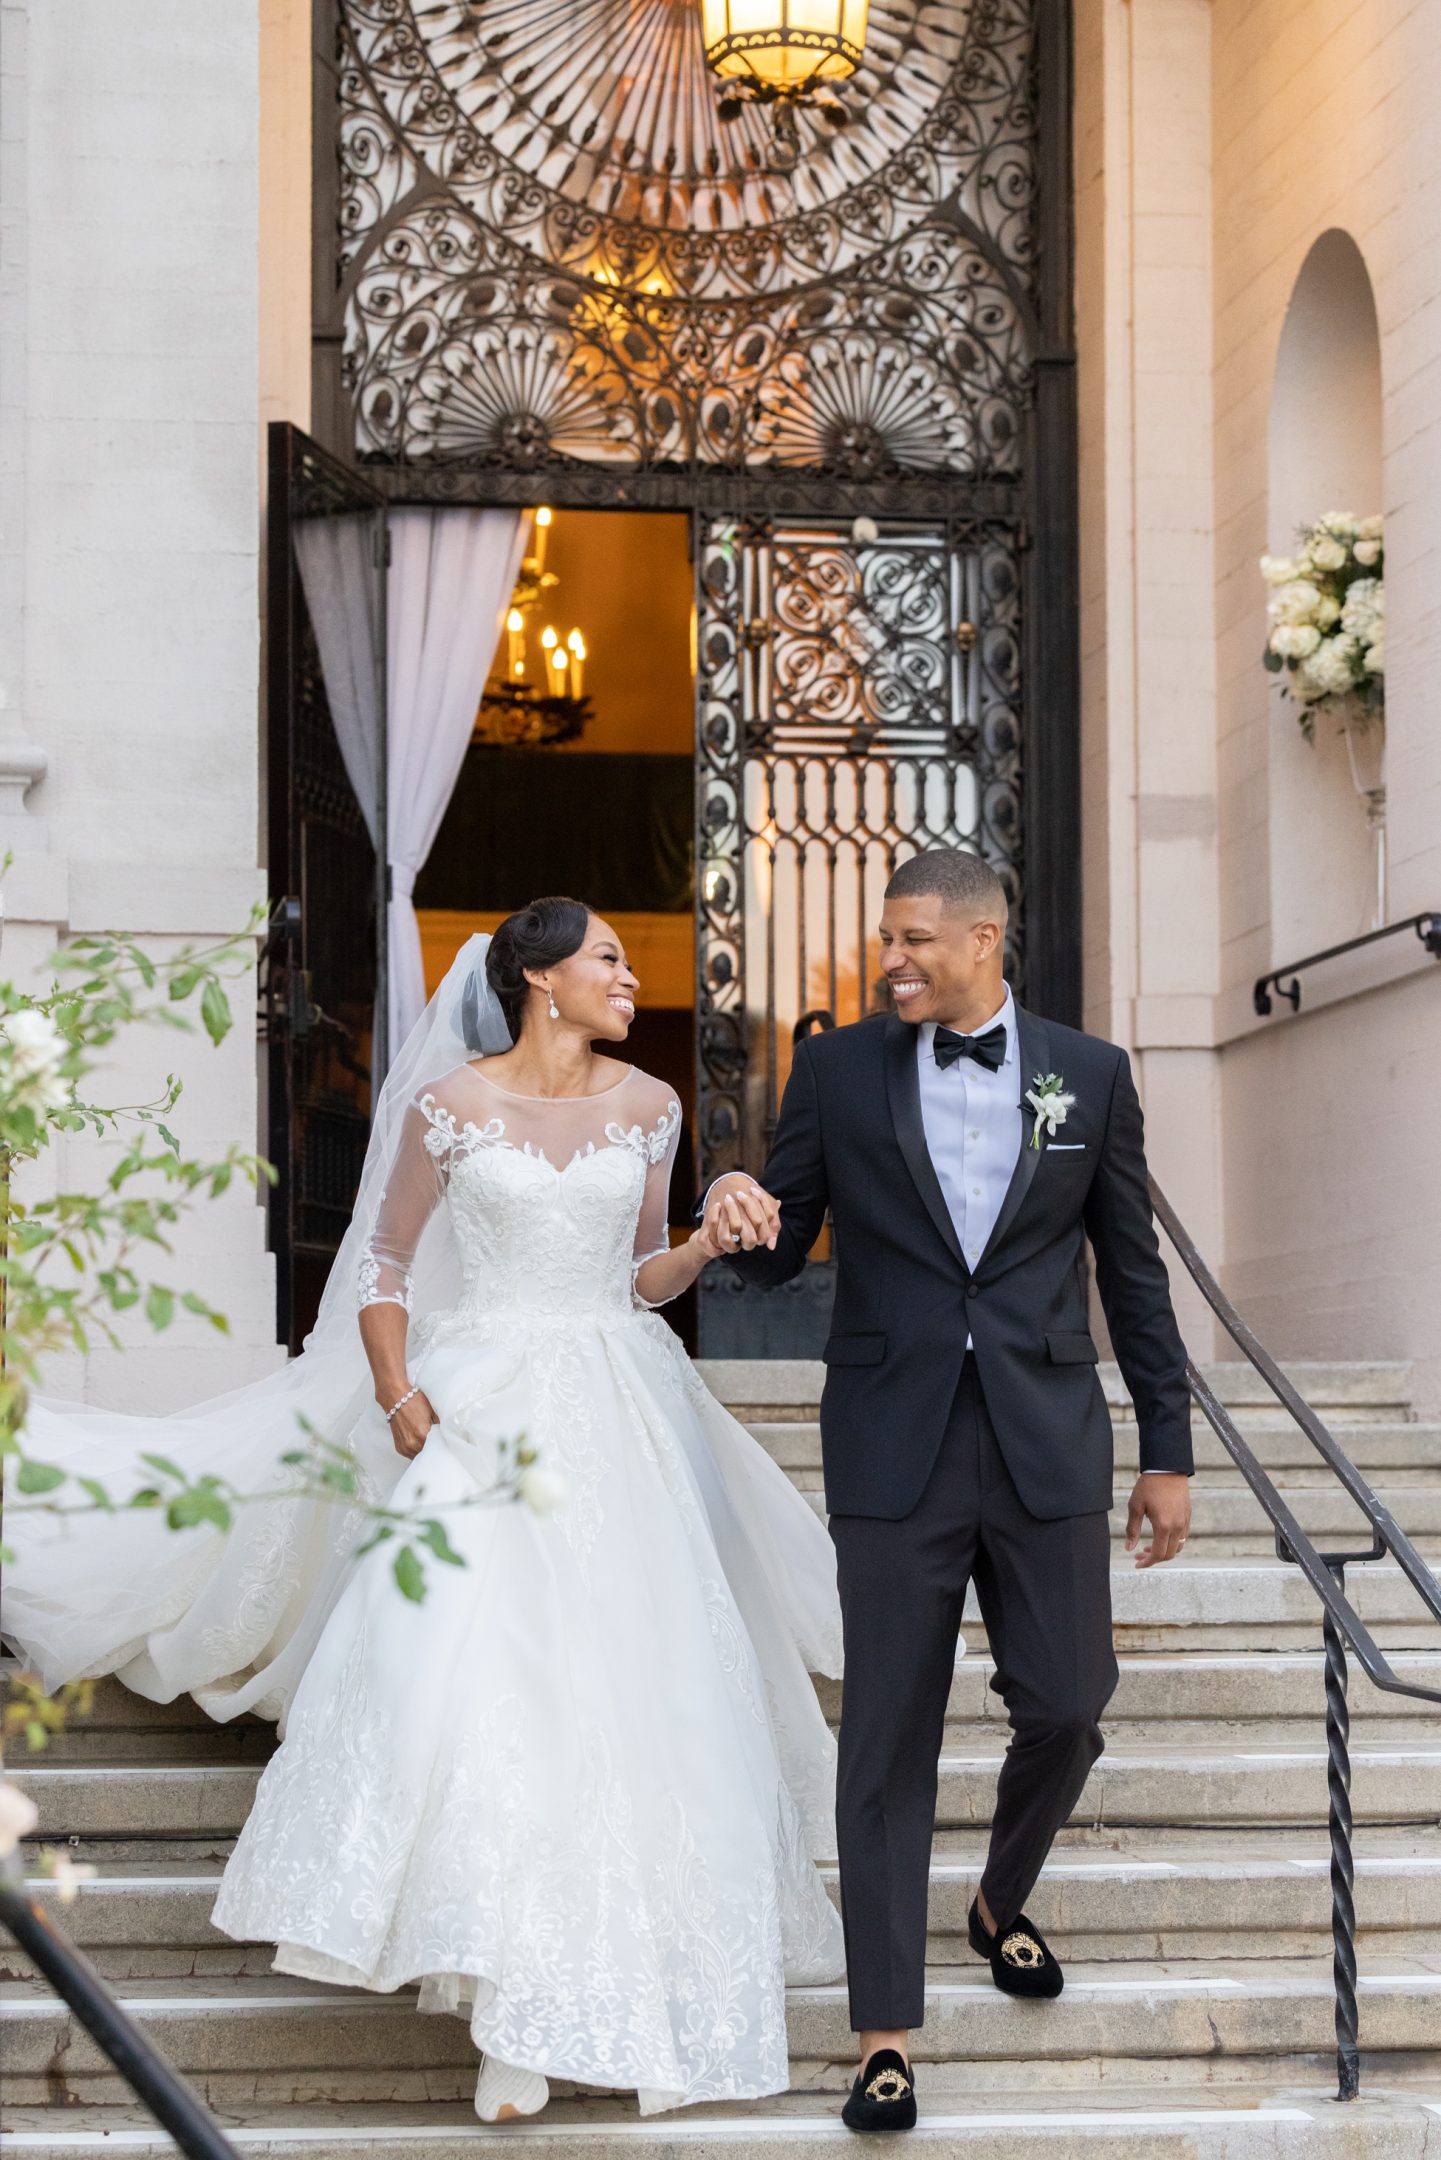 OLYMPIAN ALLYSON FELIX CELEBRATES HER MARRIAGE WITH A TRADITIONAL AND  TIMELESS VOW RENEWAL - Wedding Style Magazine